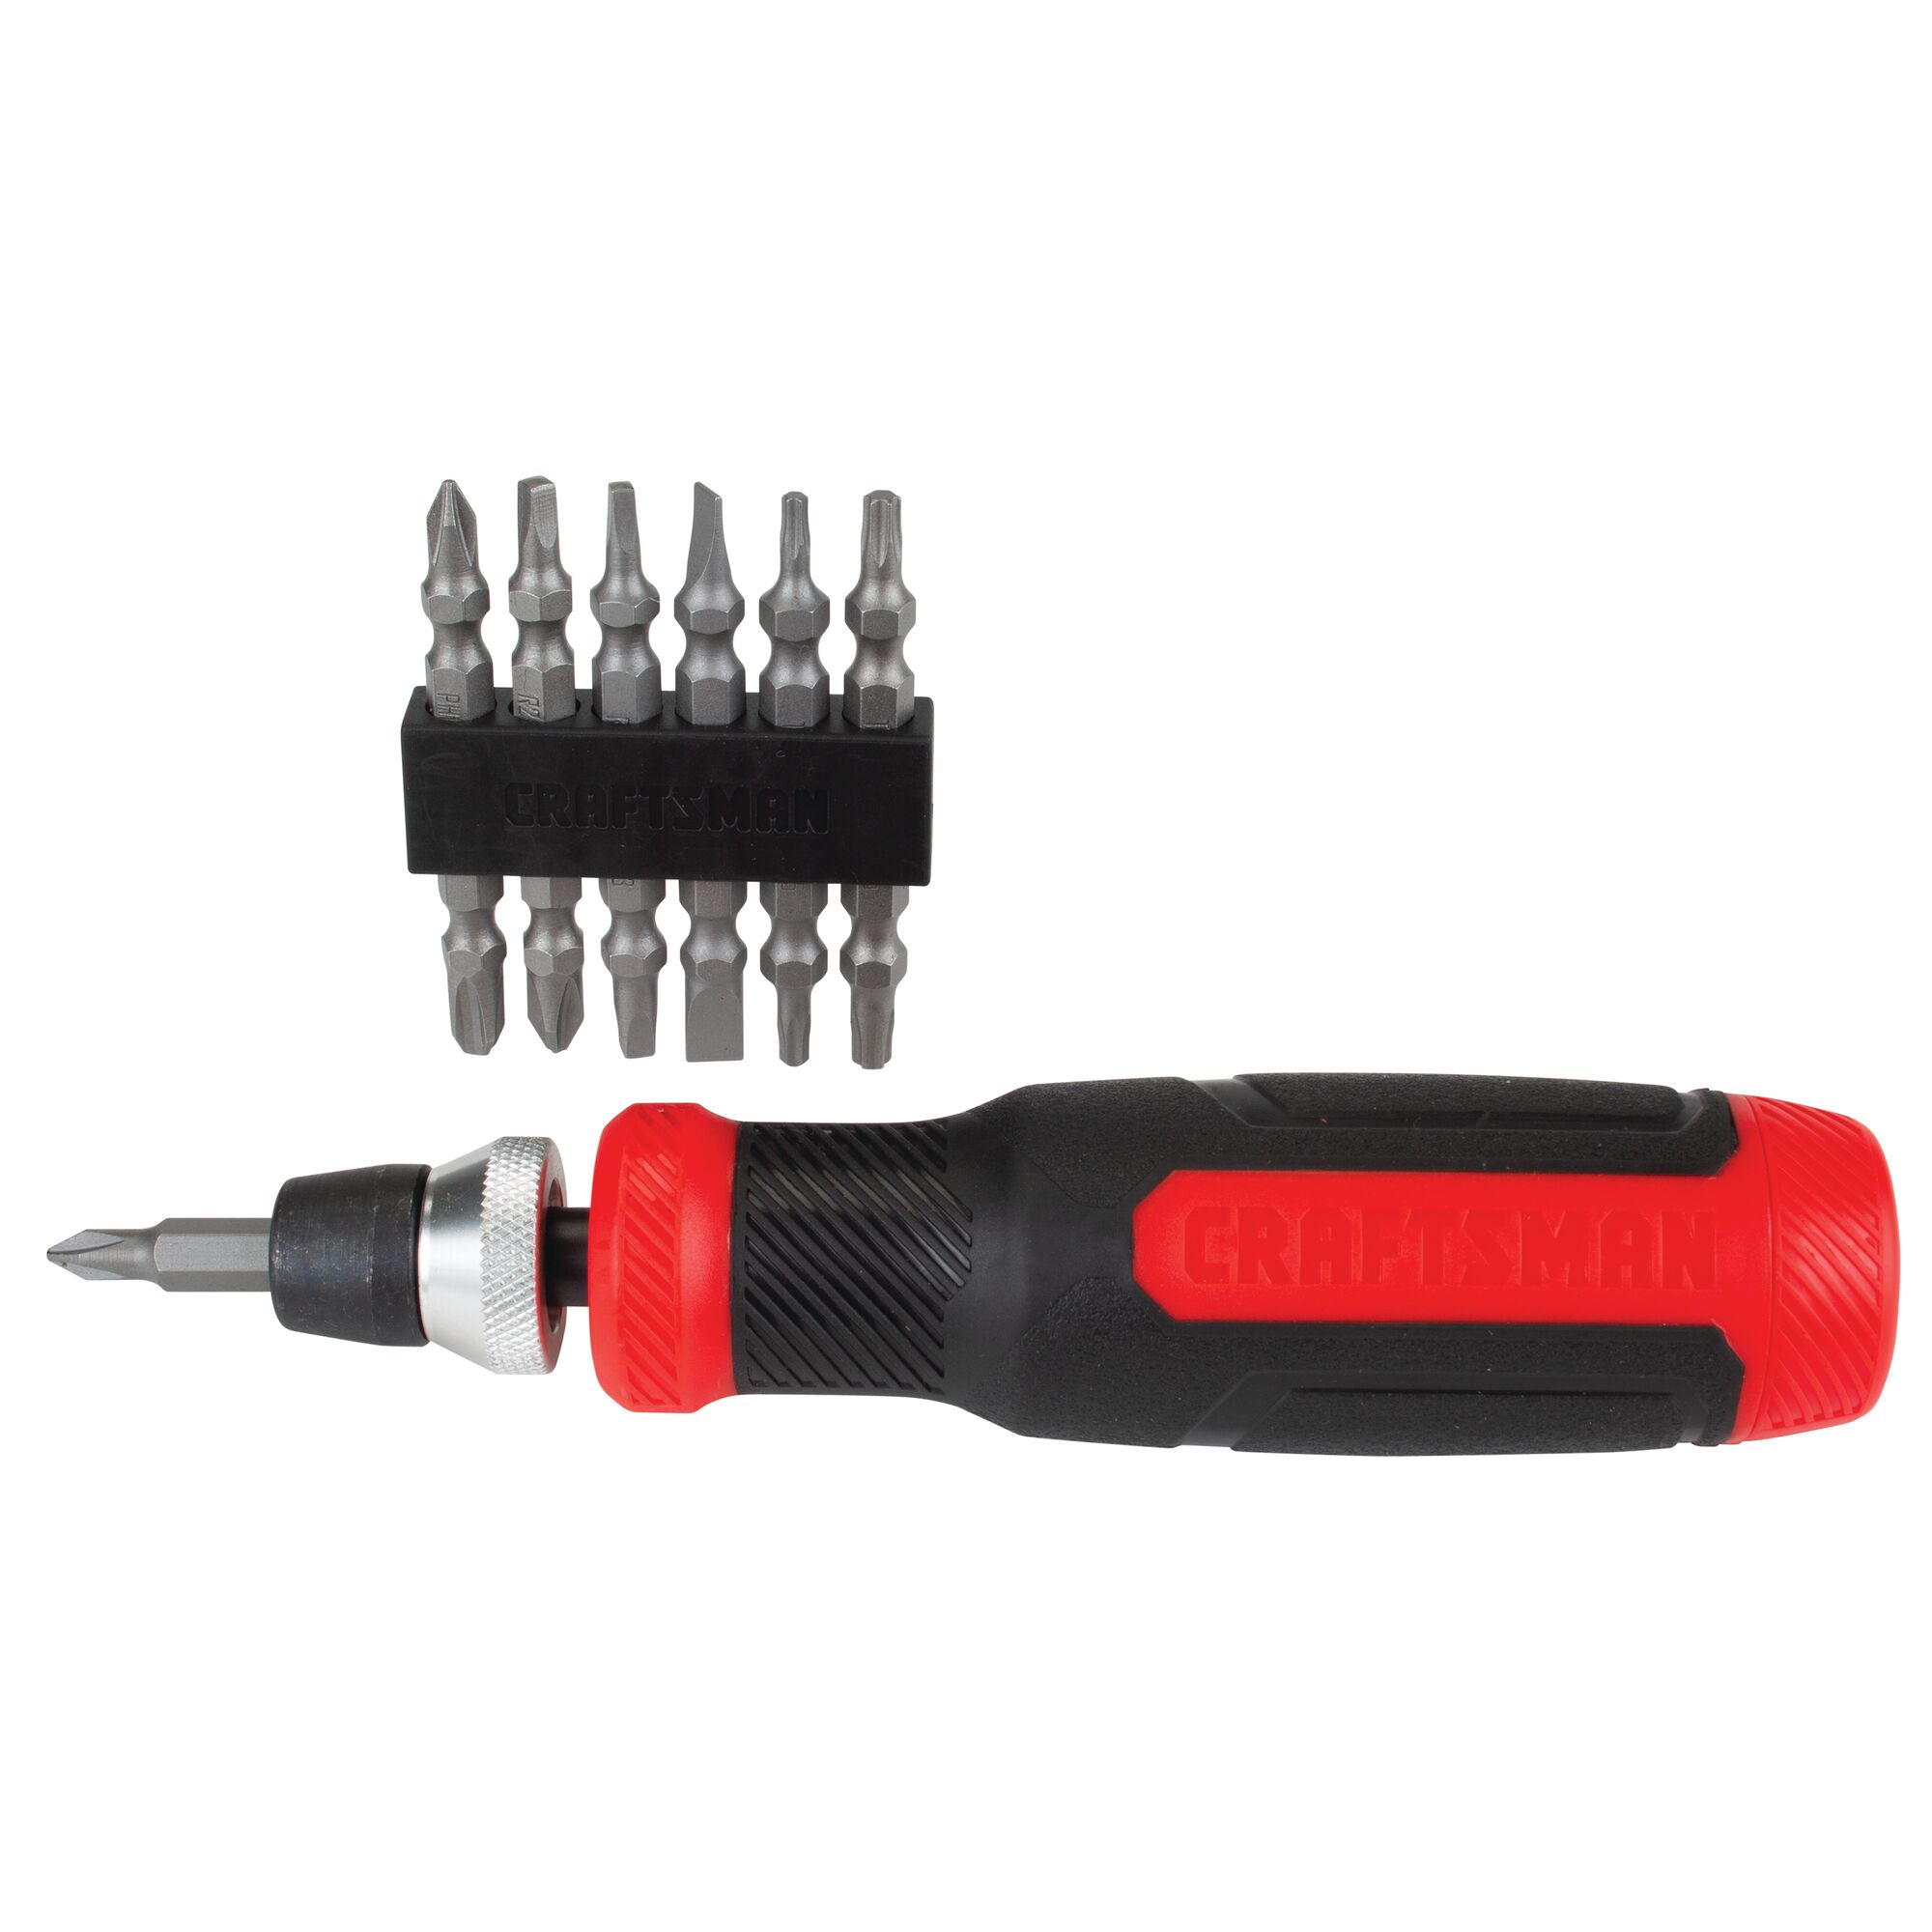 View of CRAFTSMAN Screwdrivers: Multi Bits on white background